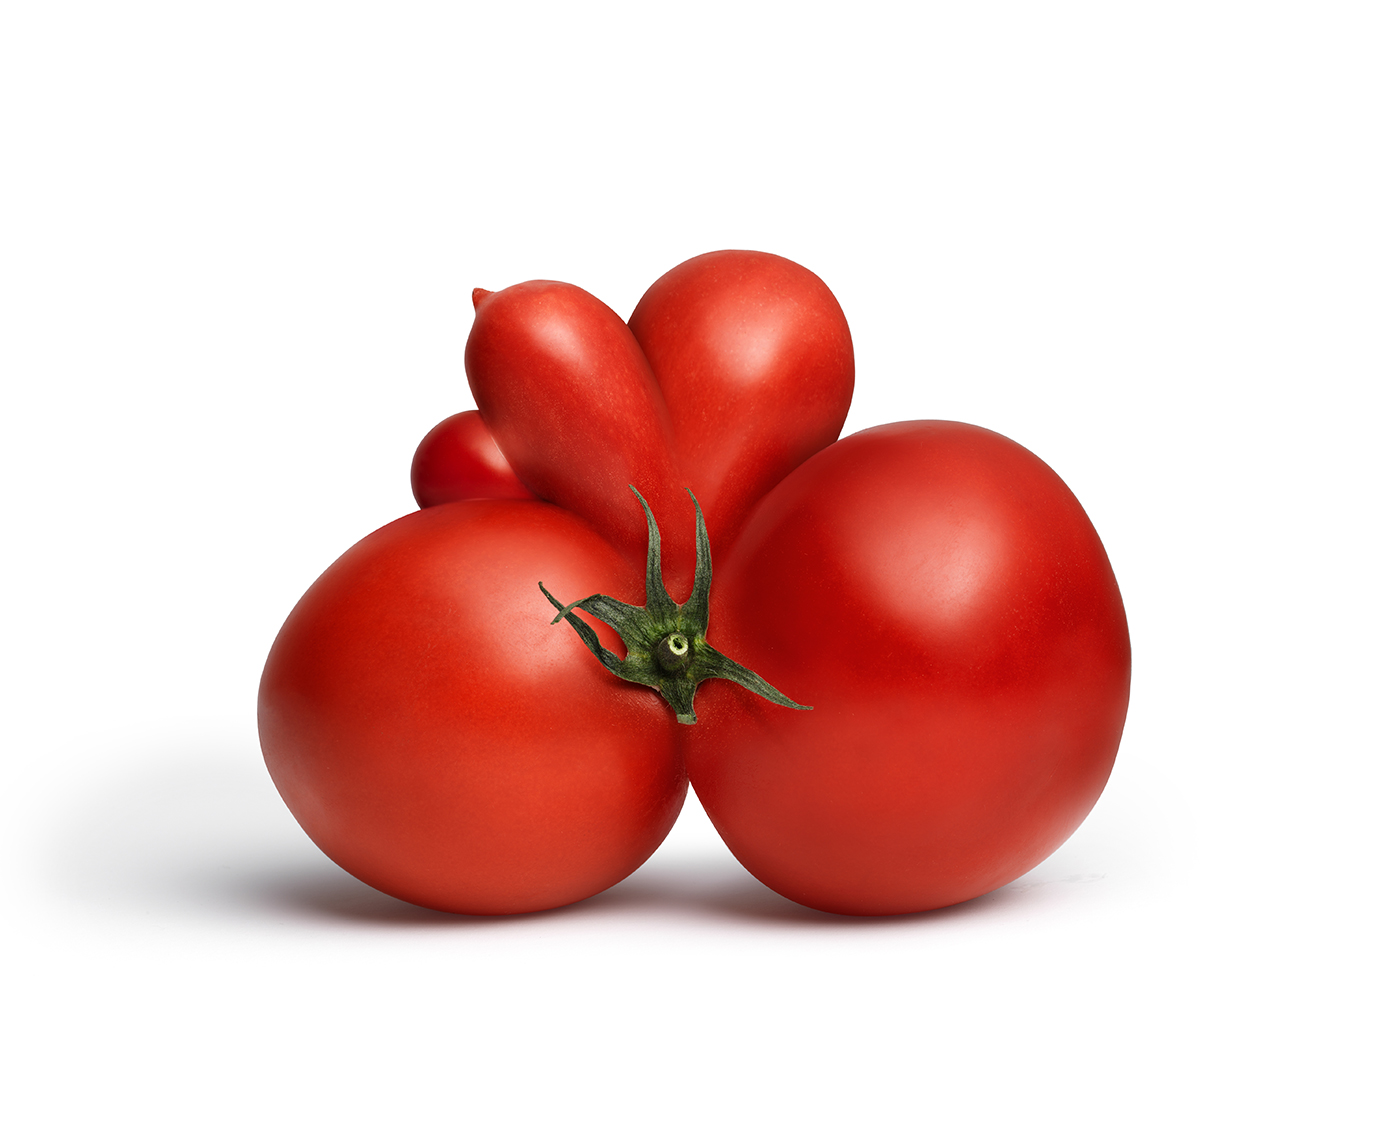 Commercial Photography — Mutant Tomato